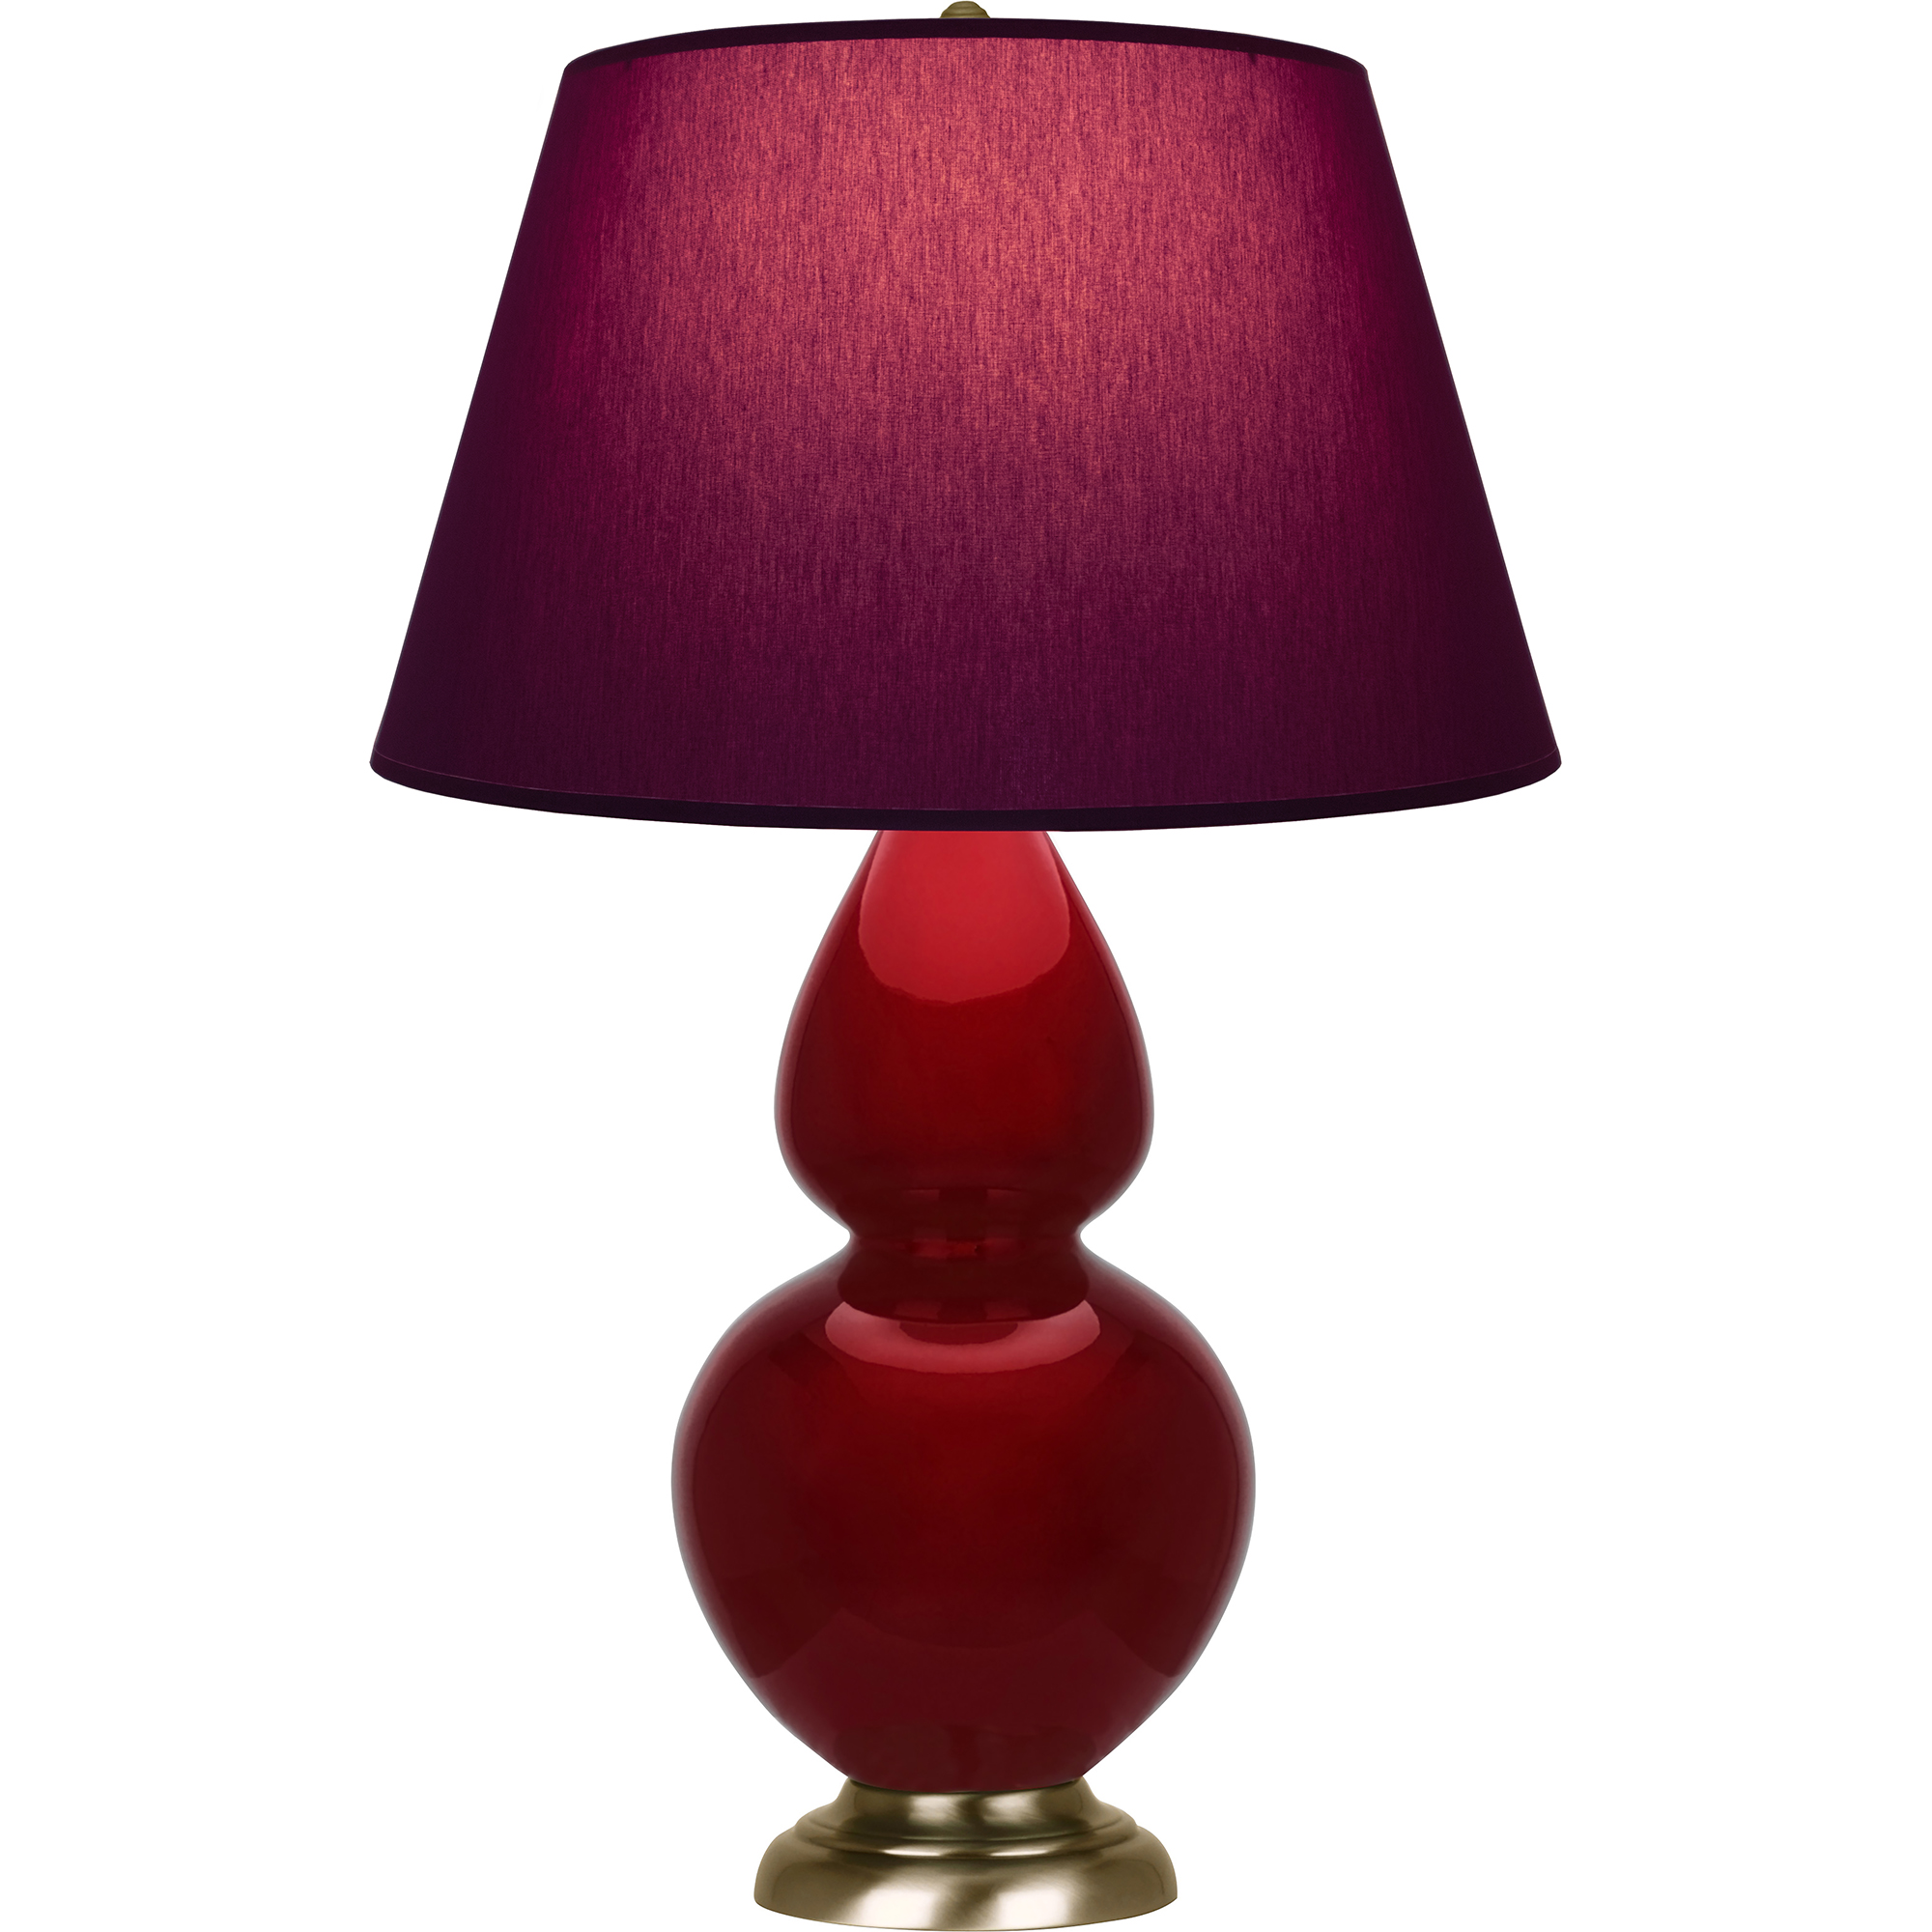 Double Gourd Table Lamp Style #SA20P